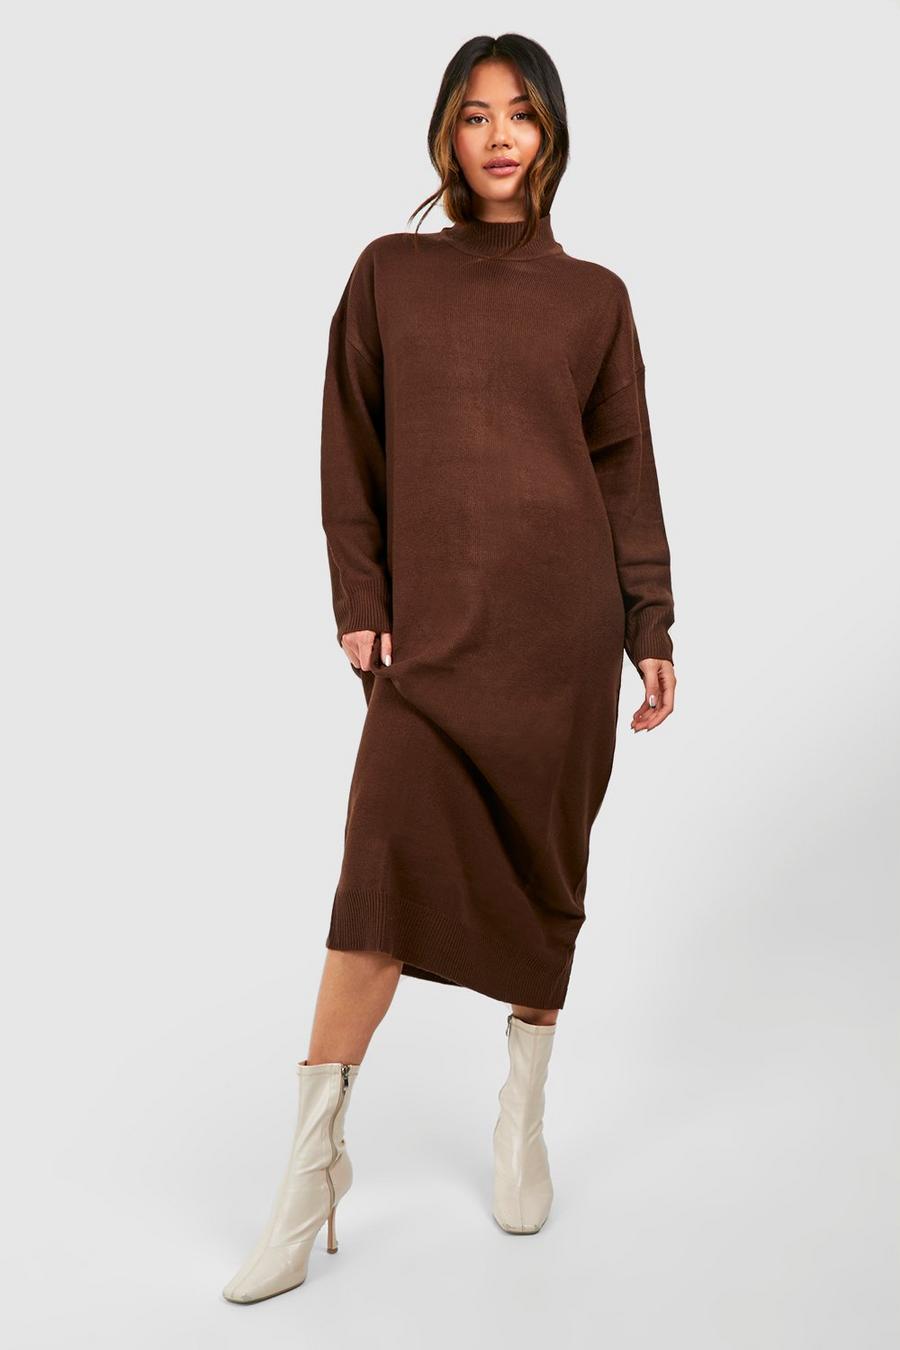 Chocolate brown High Neck Knitted Midi Dress